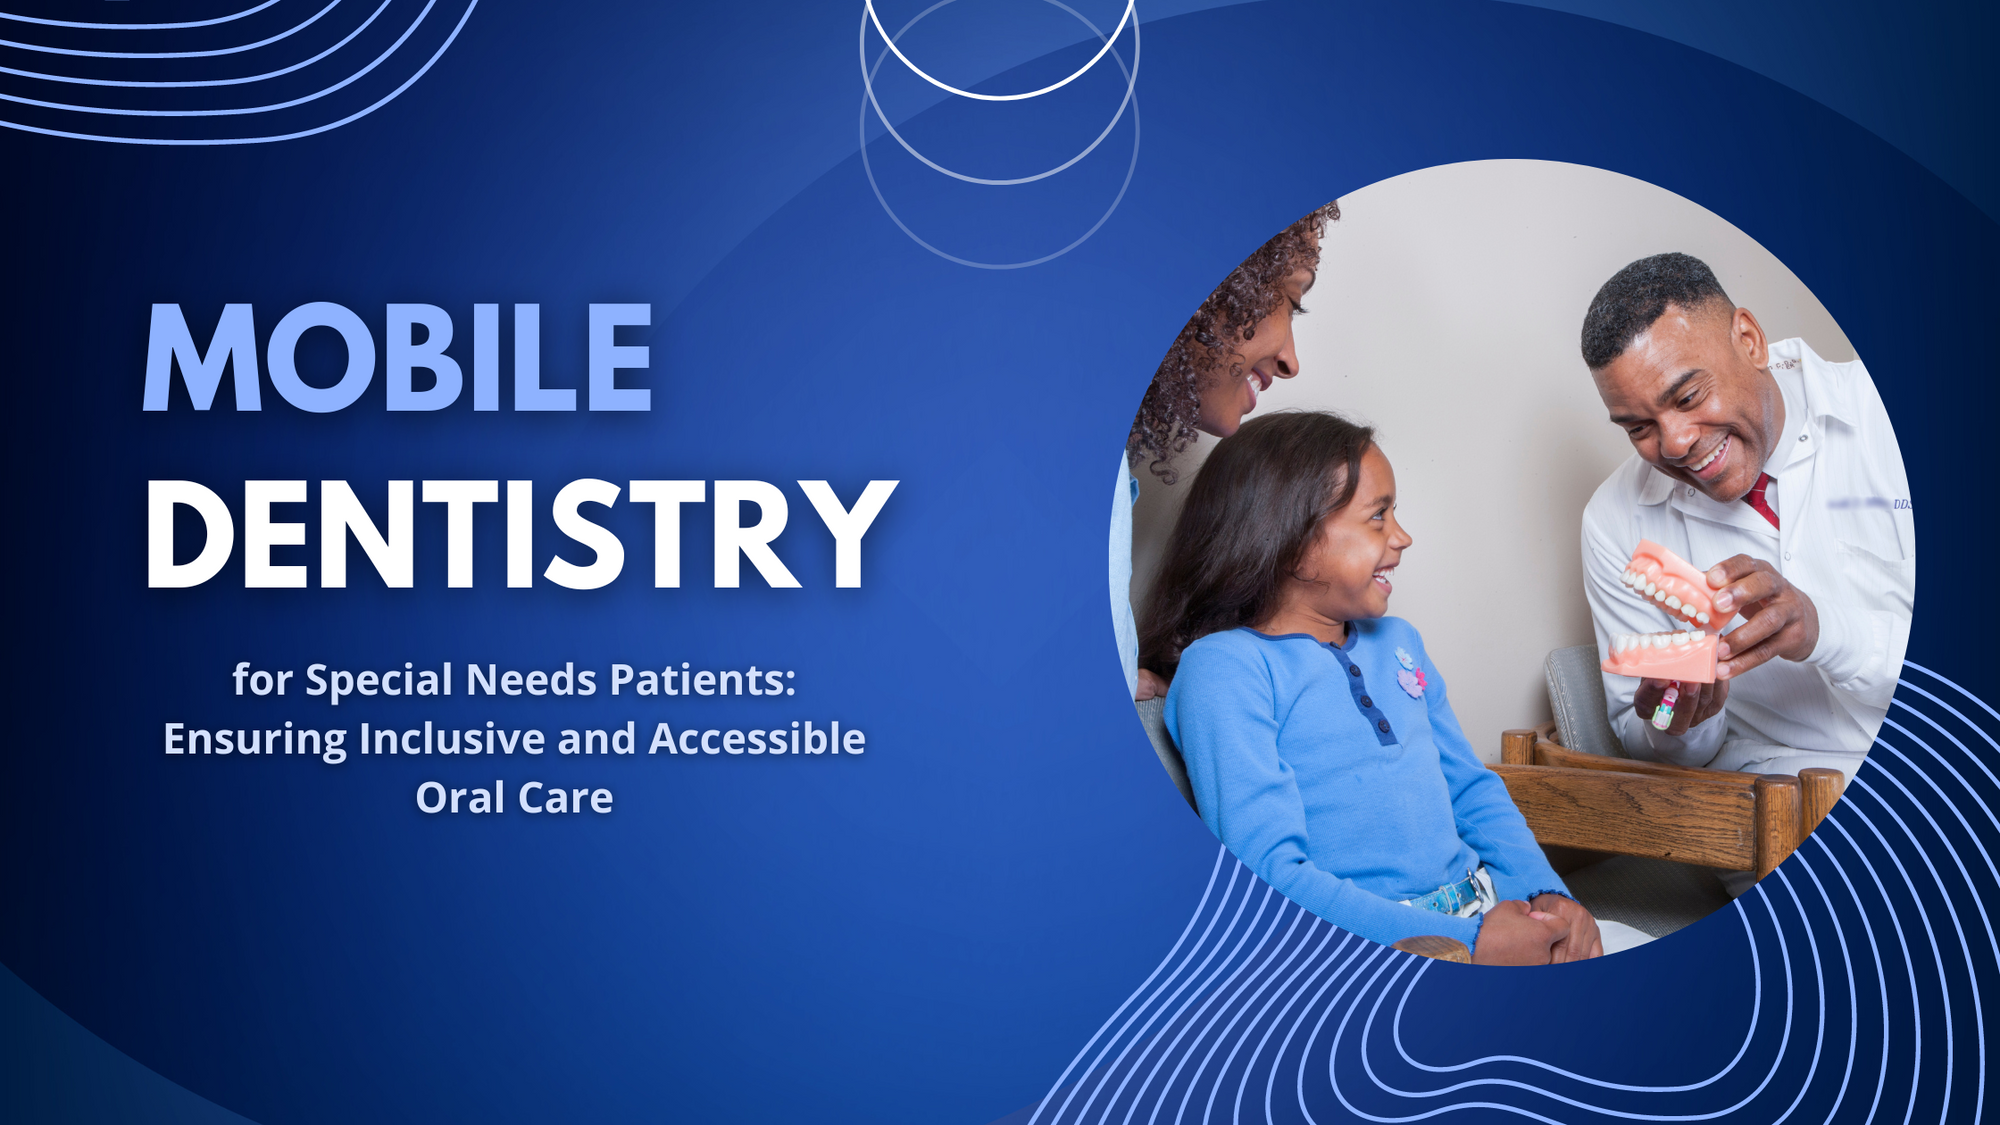 Mobile Dentistry for Special Needs Patients: Ensuring Inclusive and Accessible Oral Care